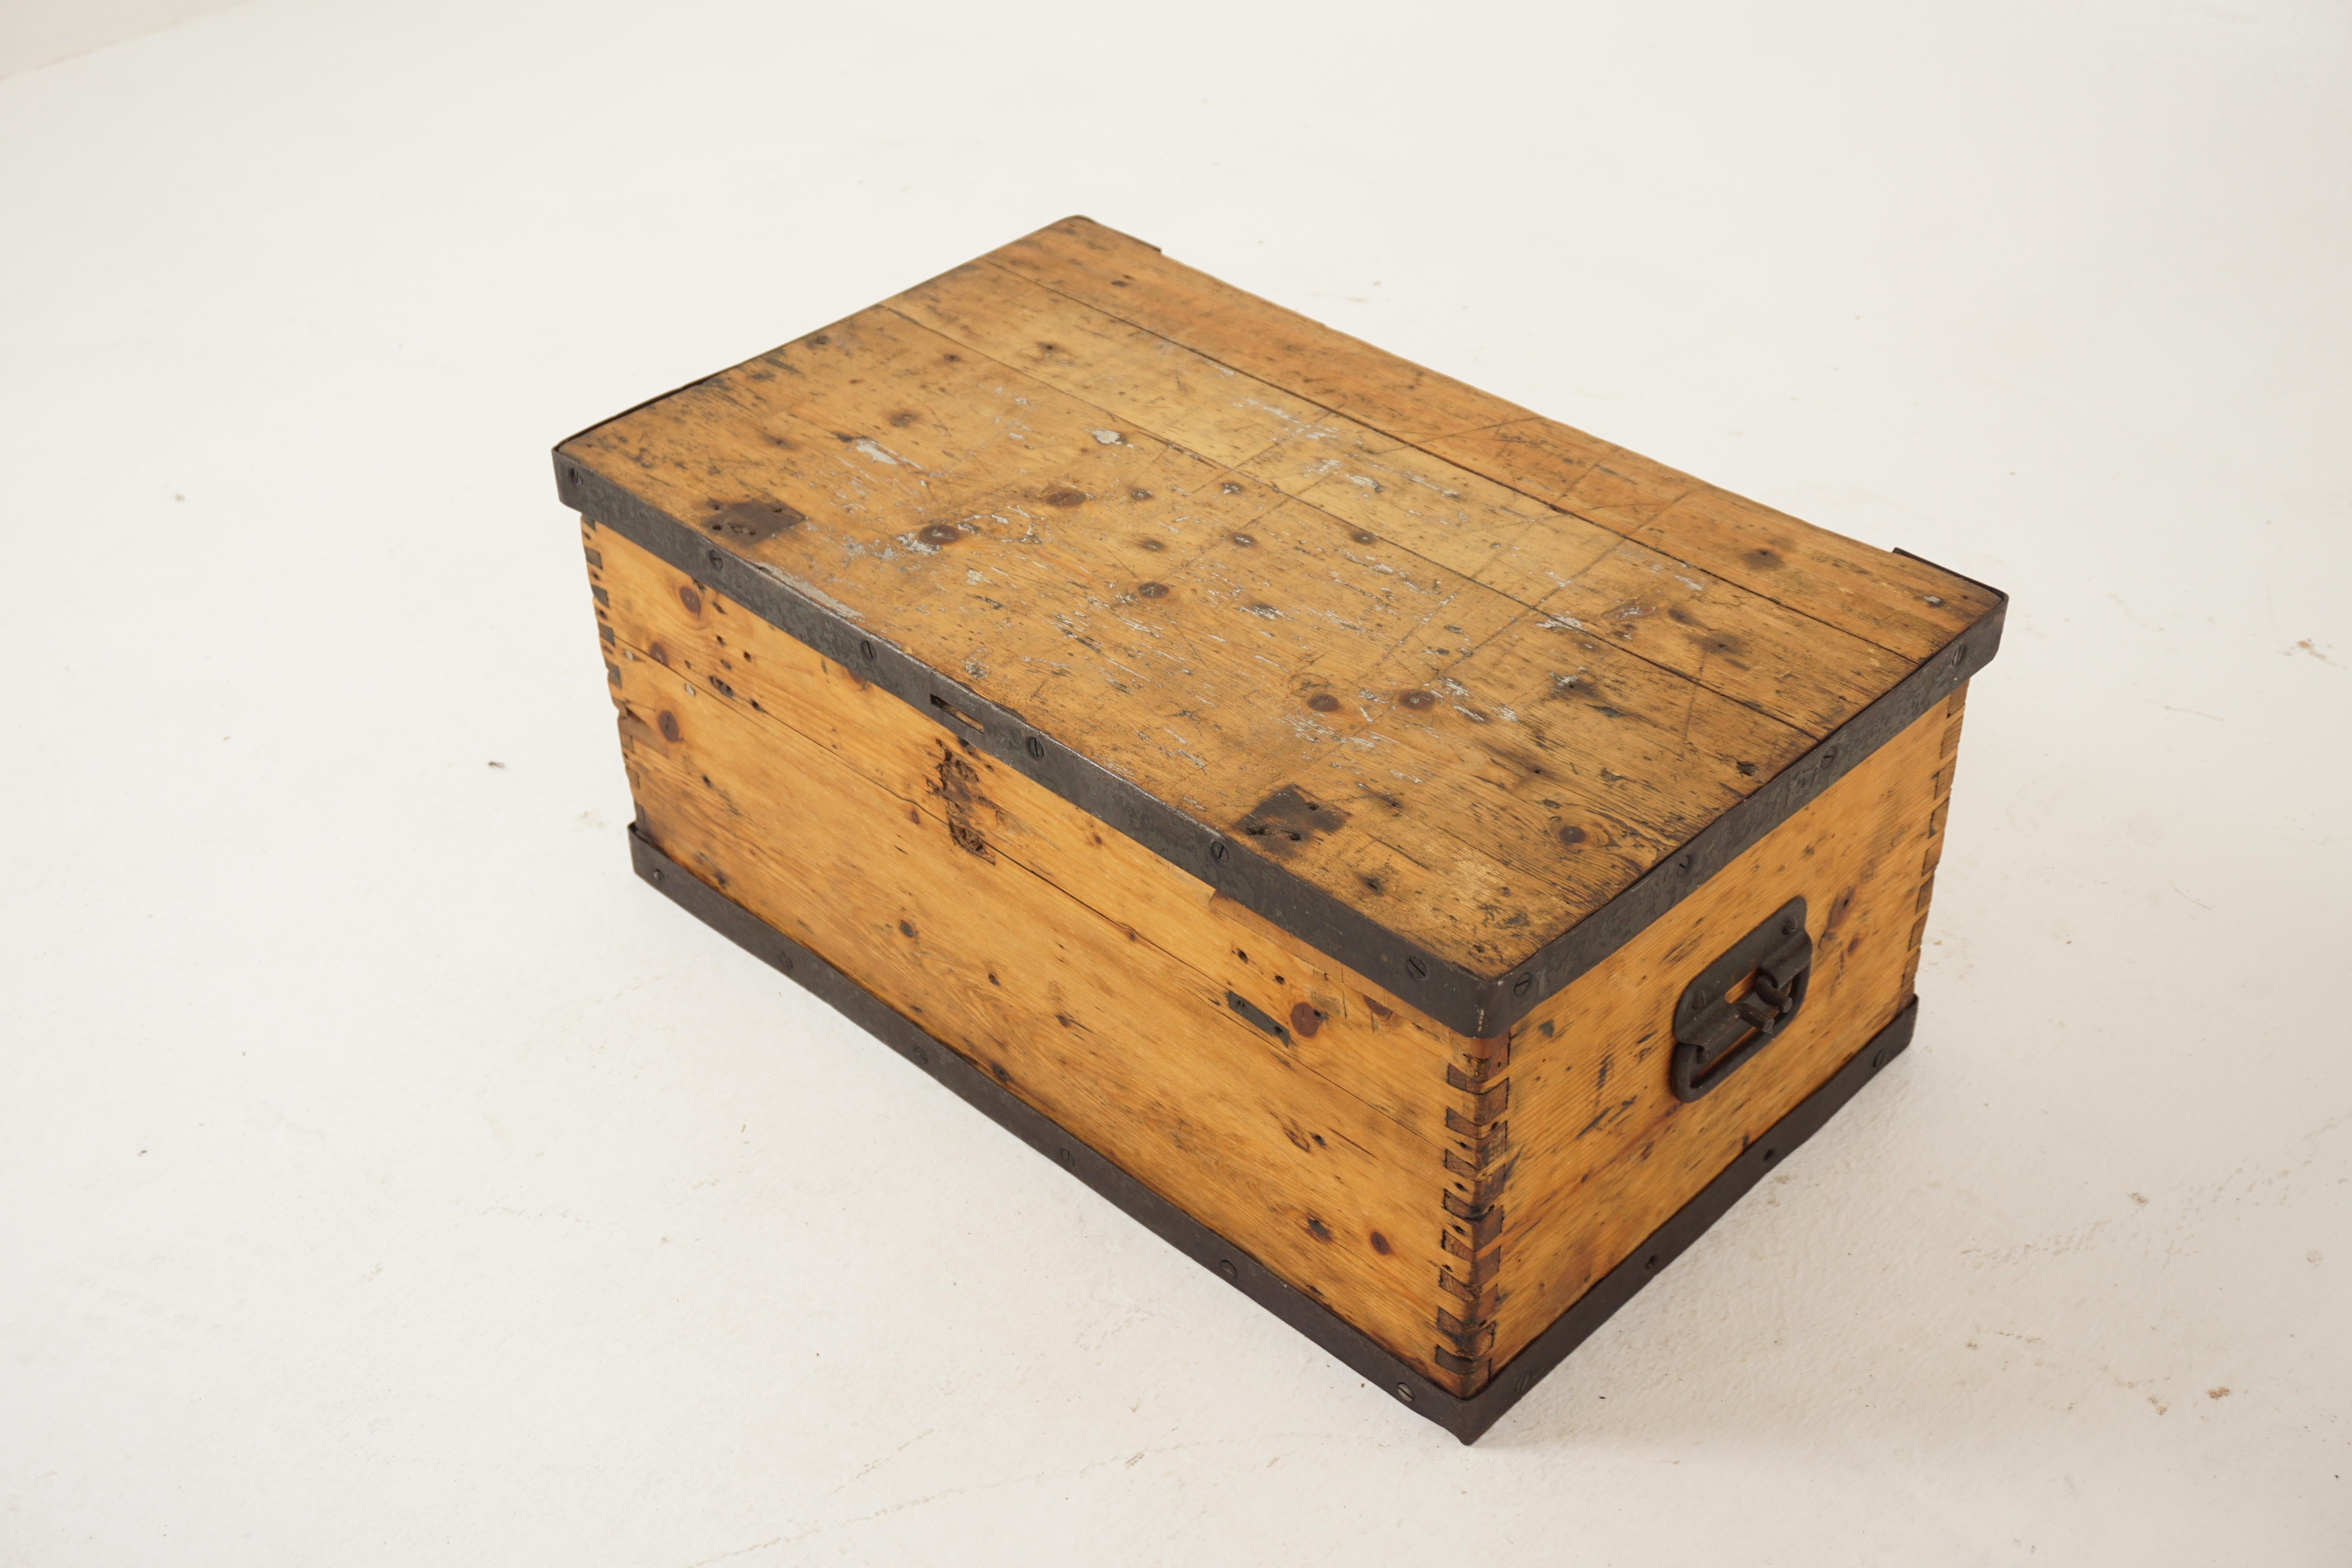 Vintage pine toy box, coffee table, dovetailed, Scotland 1930, H360

Scotland 1930
Solid Pine
Original Finish
Rectangular top with metal bound lid
Dovetailed corners.
With metal non-carrying handles
Metal bound base which gives plenty of strength to